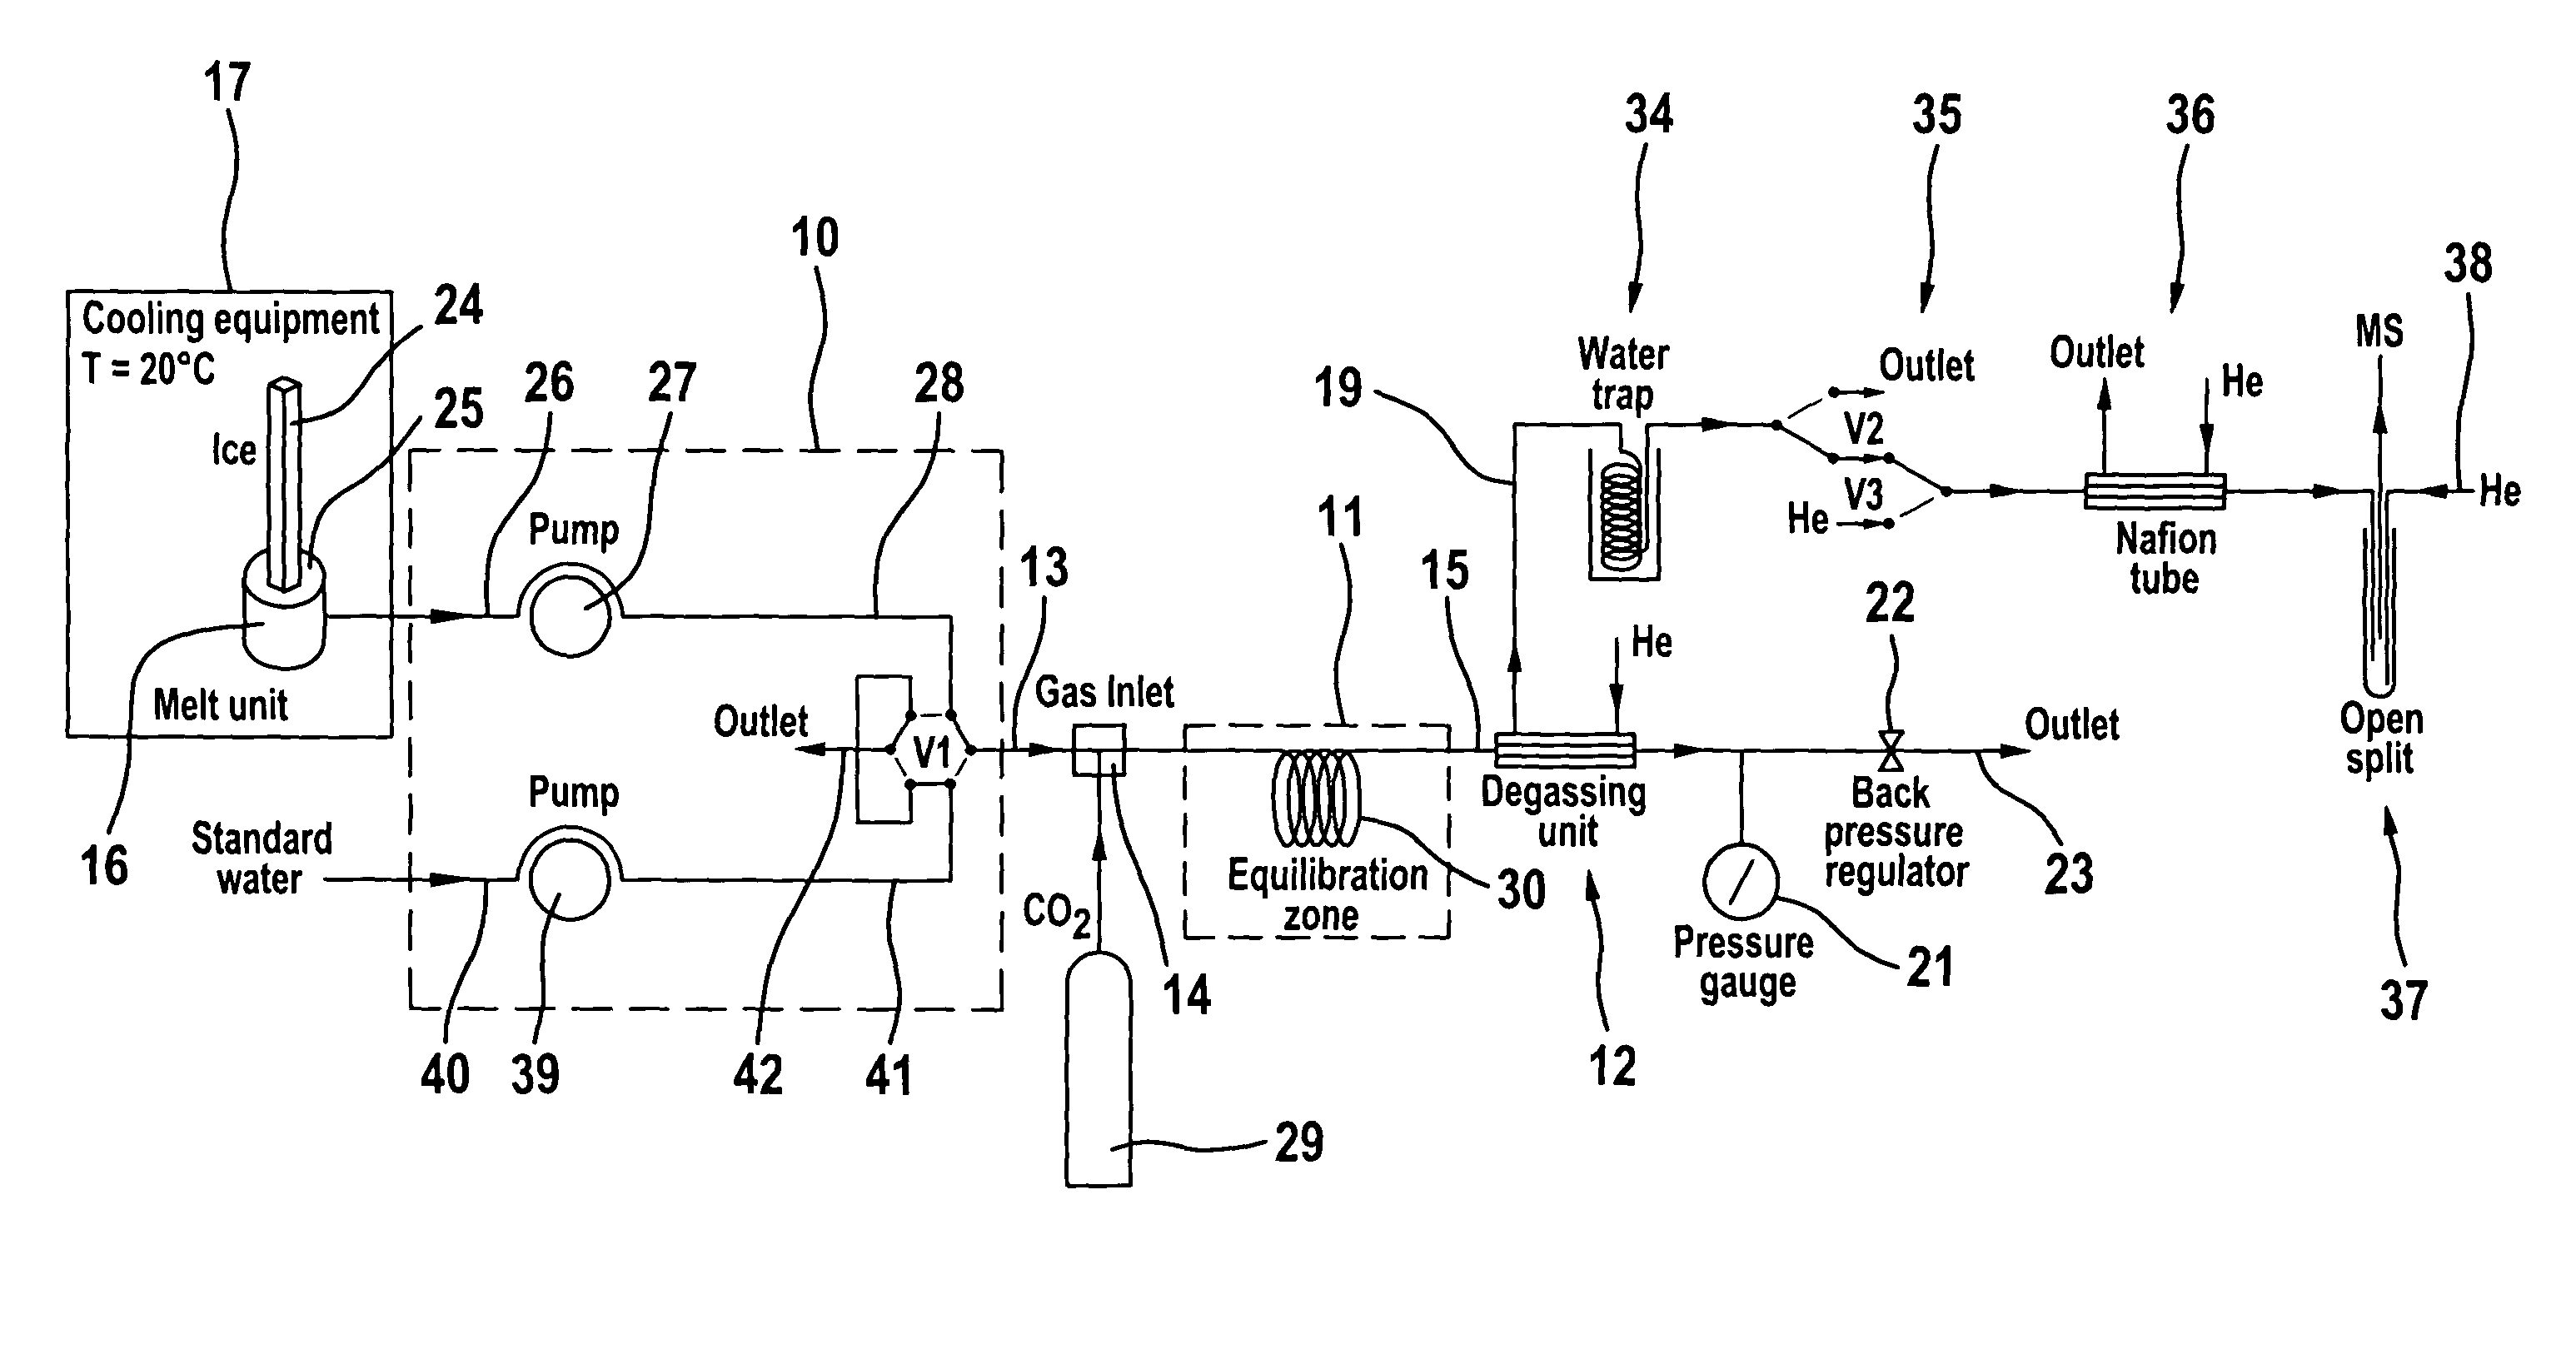 Process and apparatus for providing a gaseous substance for the analysis of chemical elements or compounds